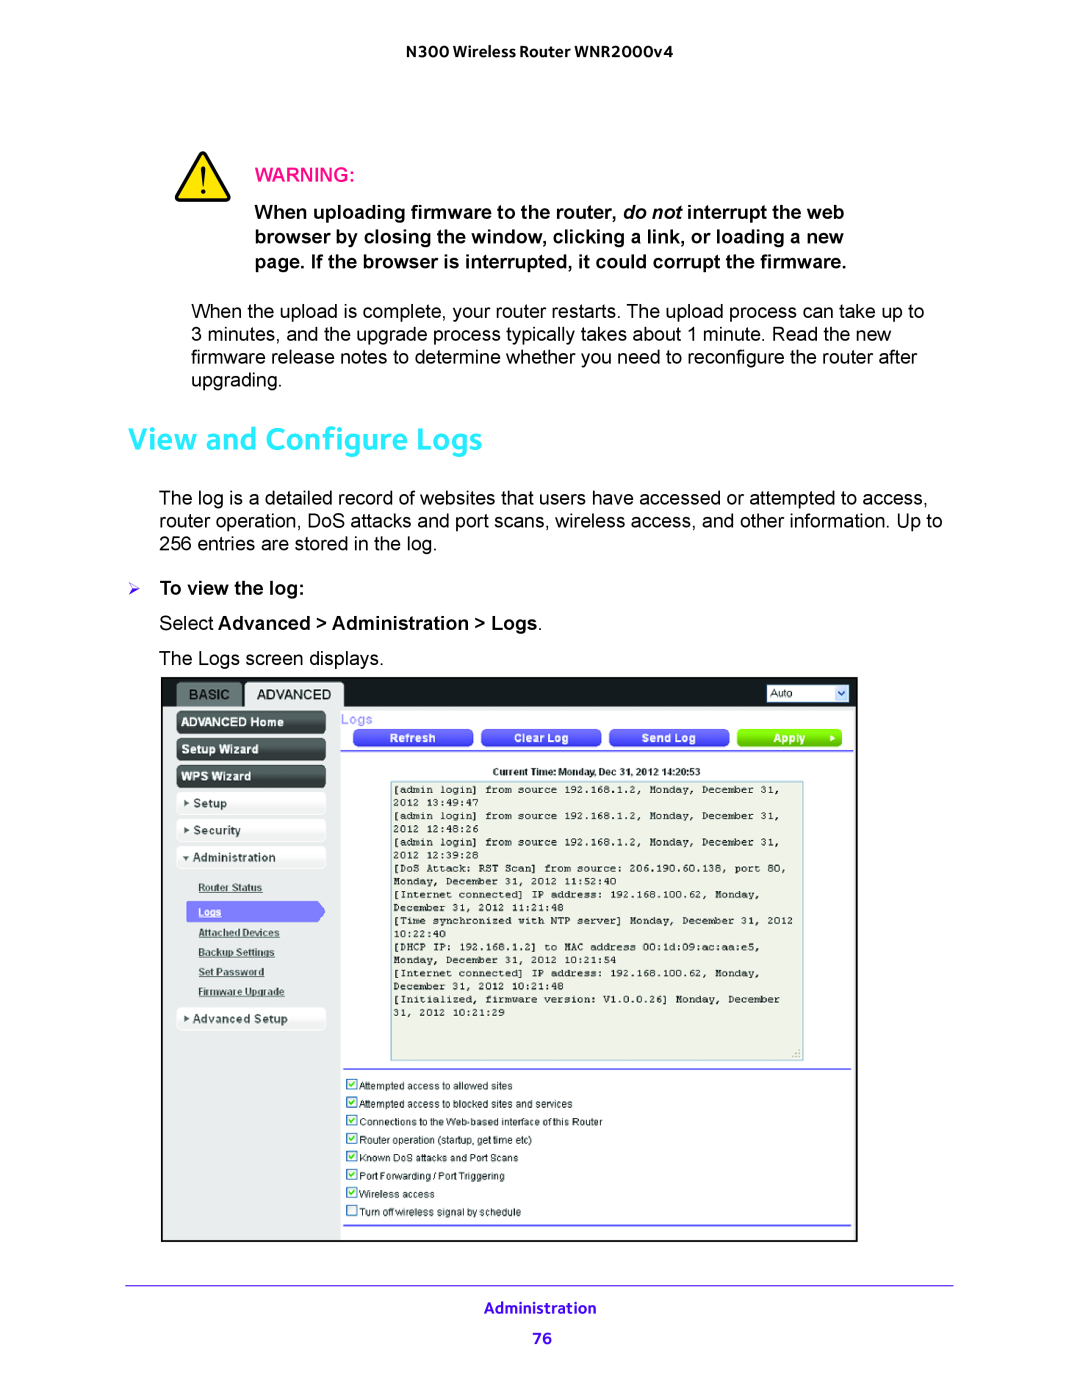 NETGEAR WNR2000-100FSS user manual View and Configure Logs,  To view the log 